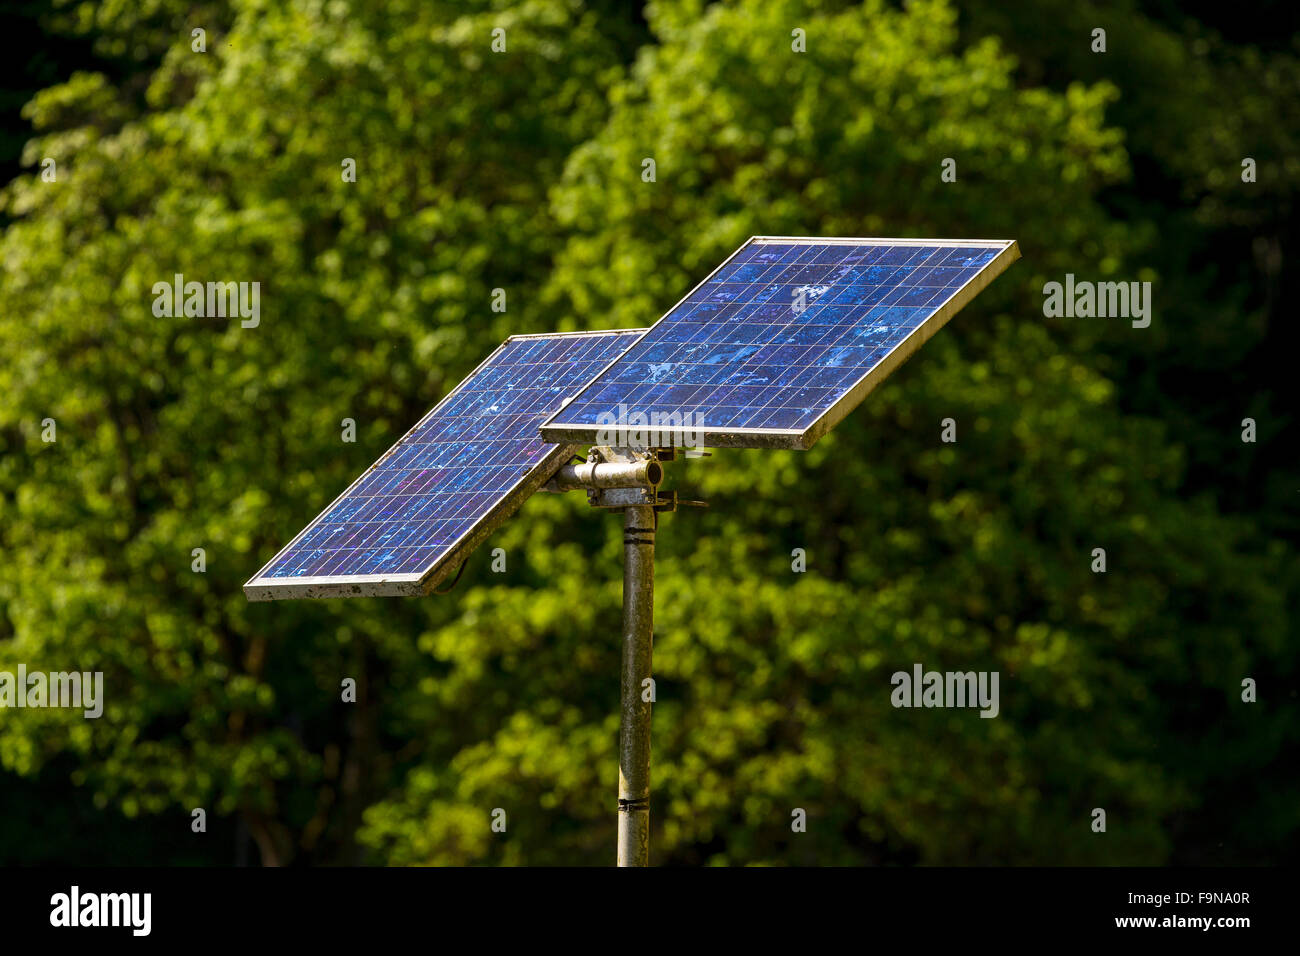 Solar panels in front of green bushes, energy from the sun Stock Photo